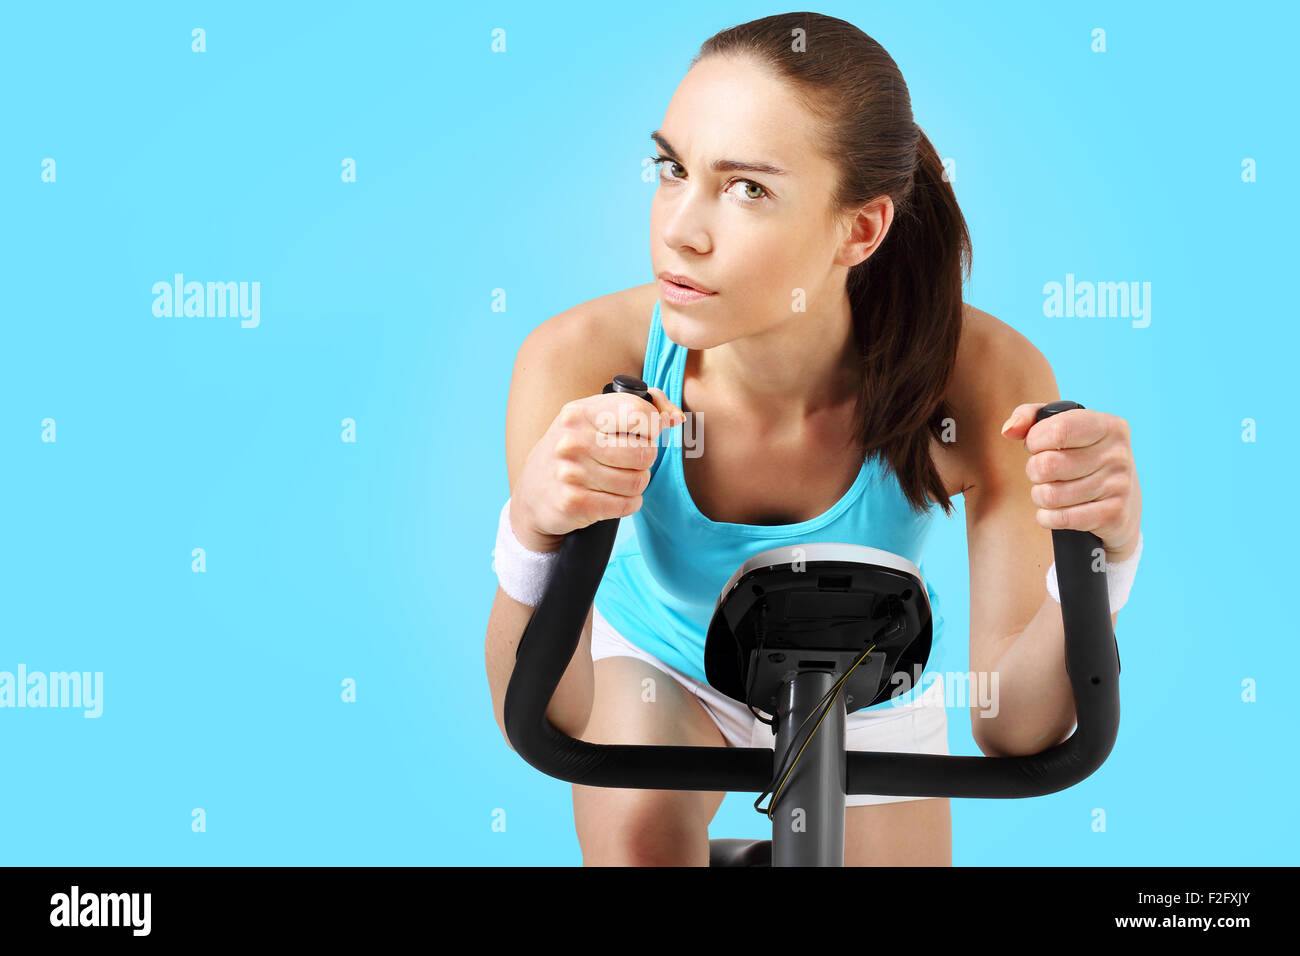 Spinning woman exercising on a stationary bike Stock Photo